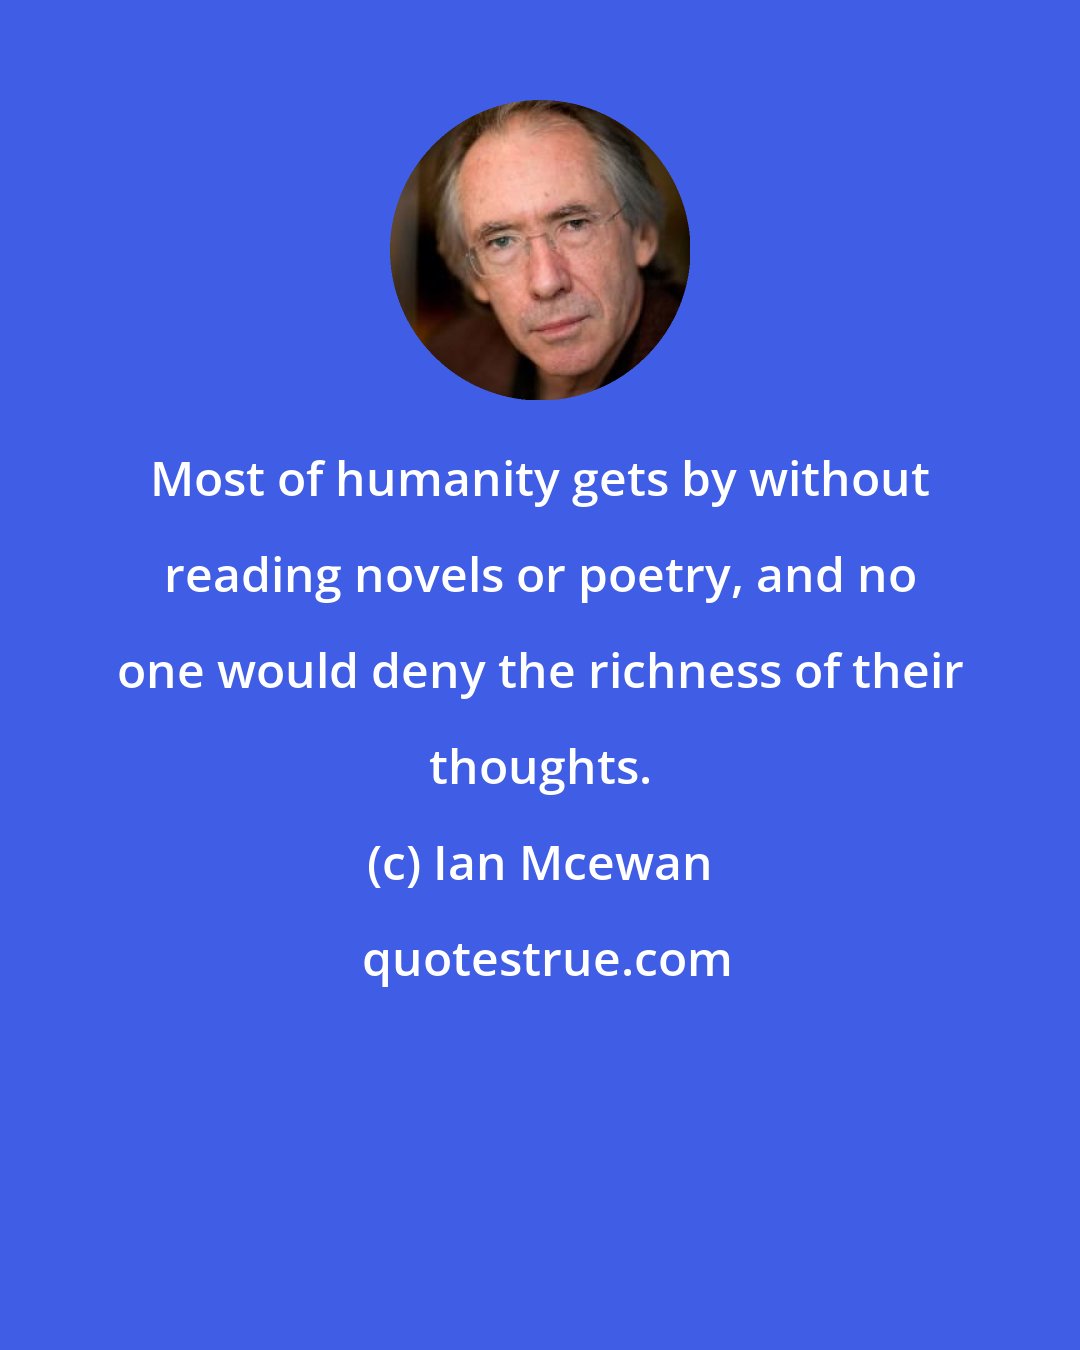 Ian Mcewan: Most of humanity gets by without reading novels or poetry, and no one would deny the richness of their thoughts.